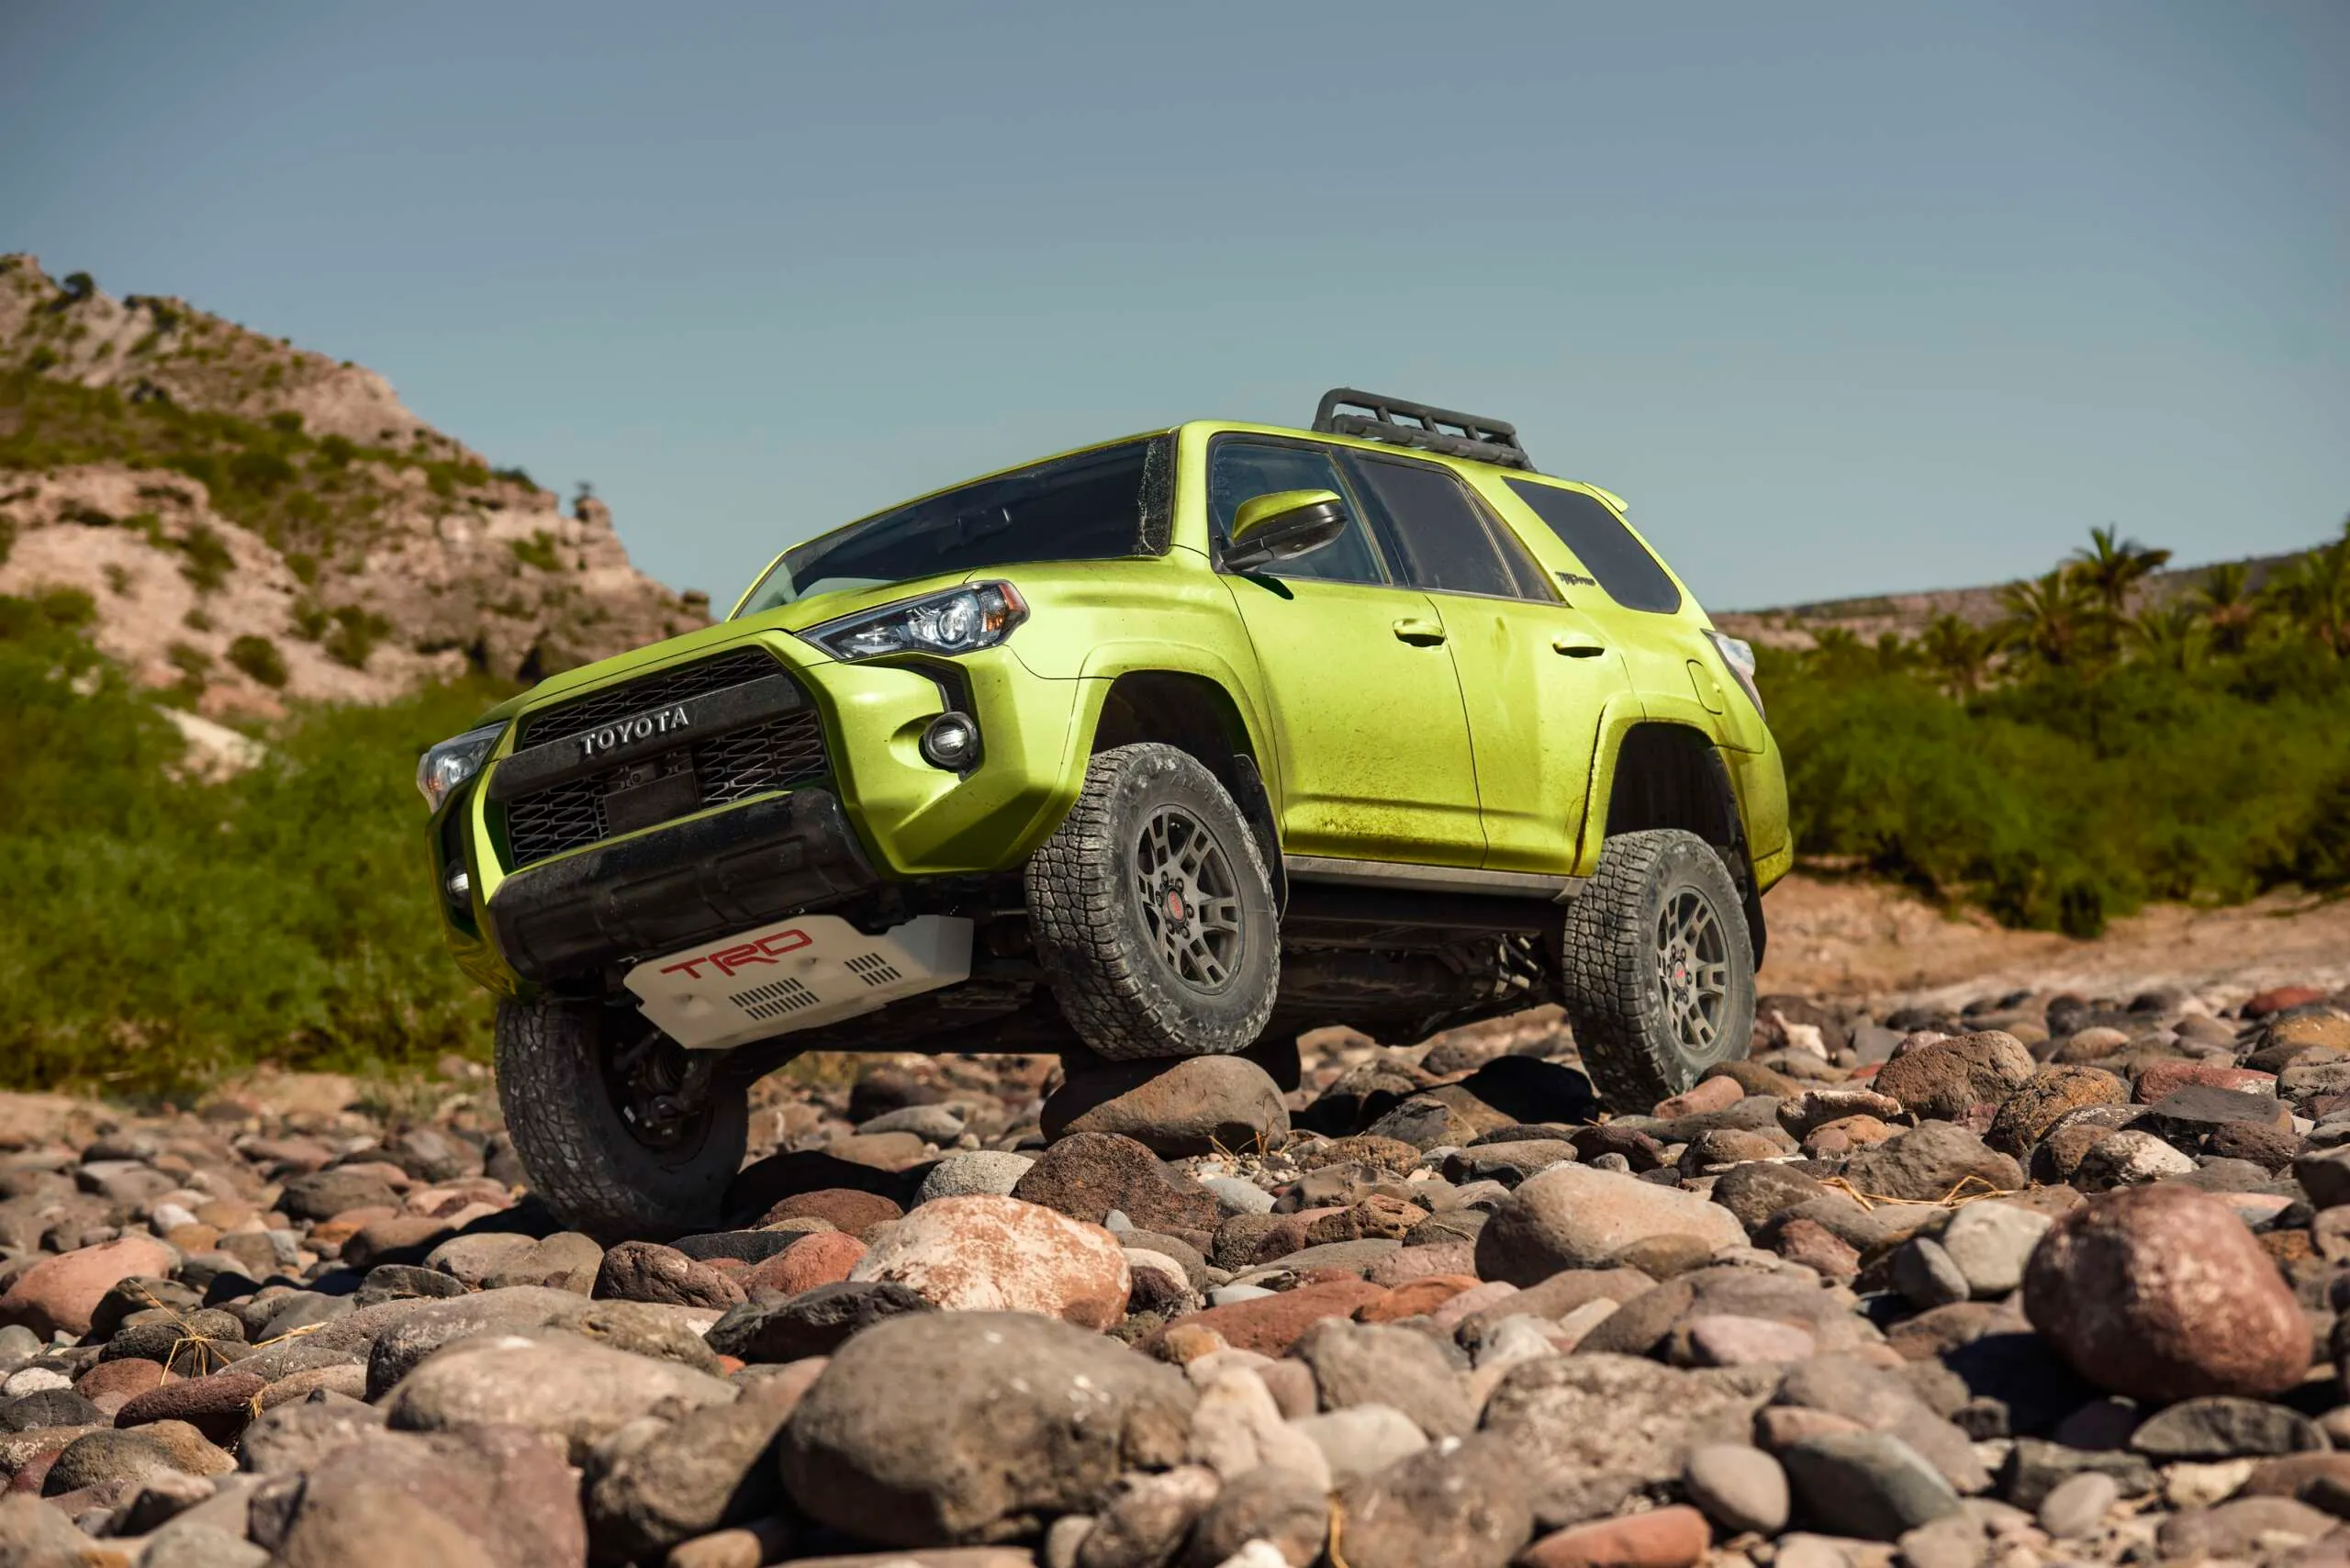 The Best Vehicles For Affordable Off-Roading